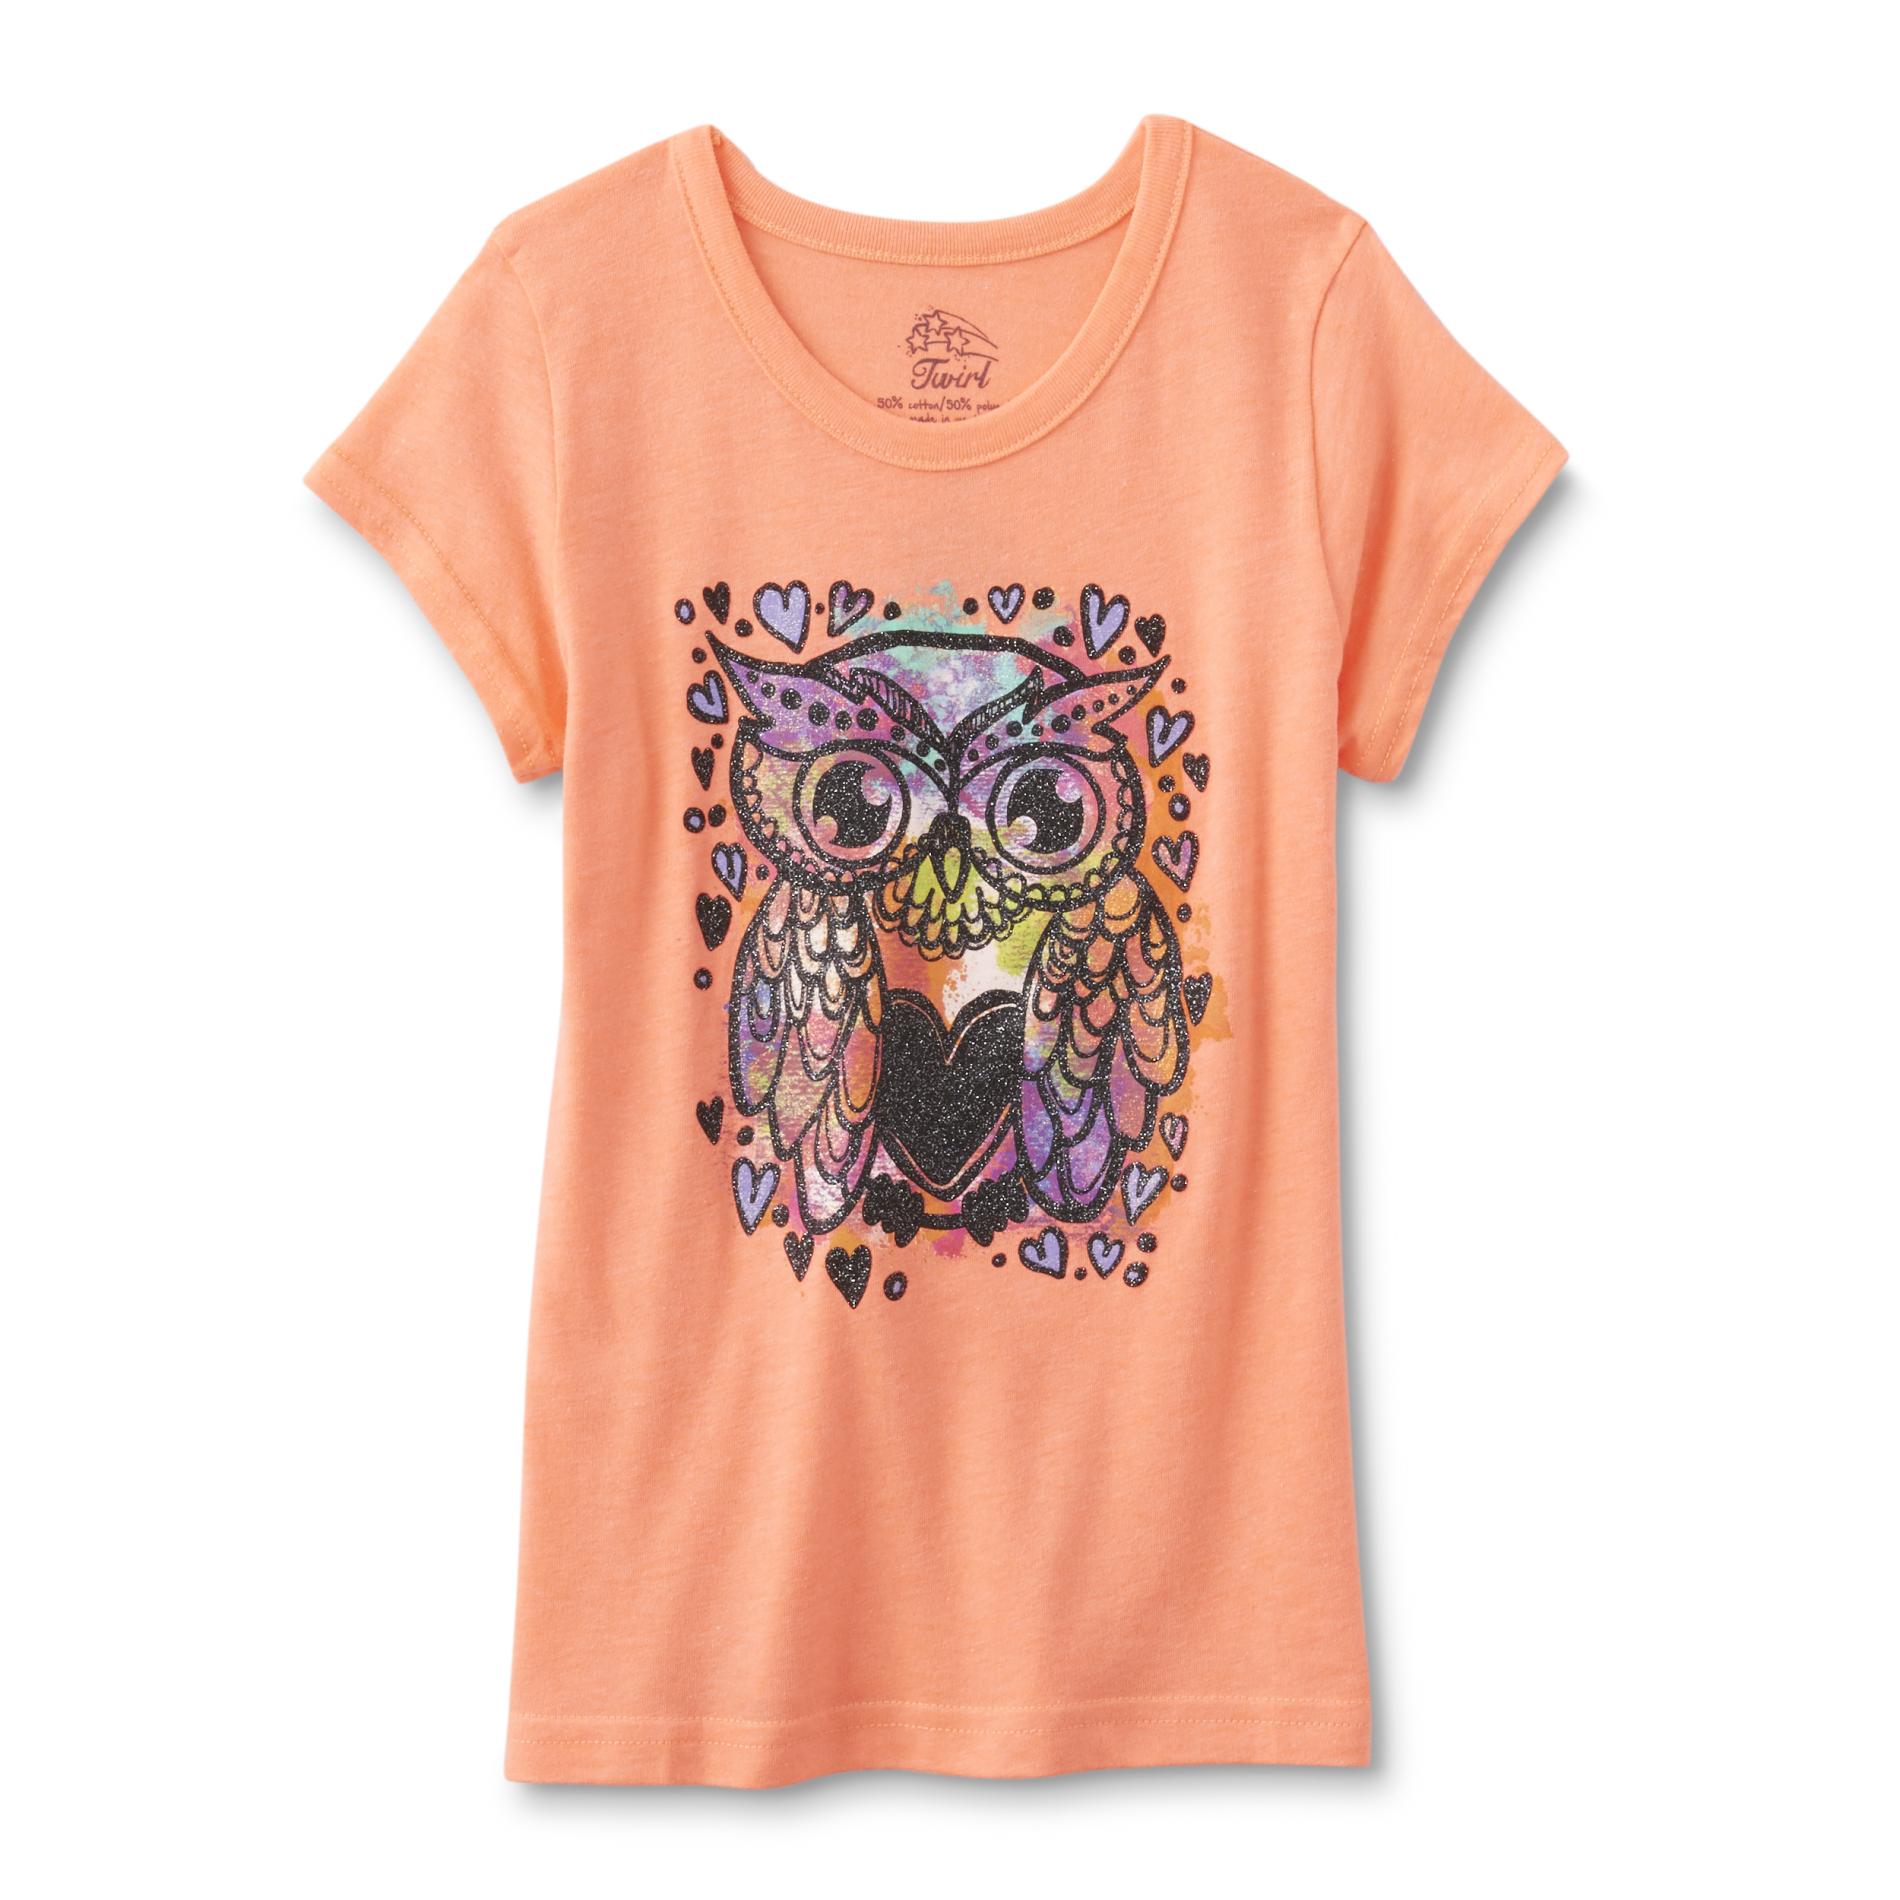 Route 66 Girls' Graphic T-Shirt - Owl